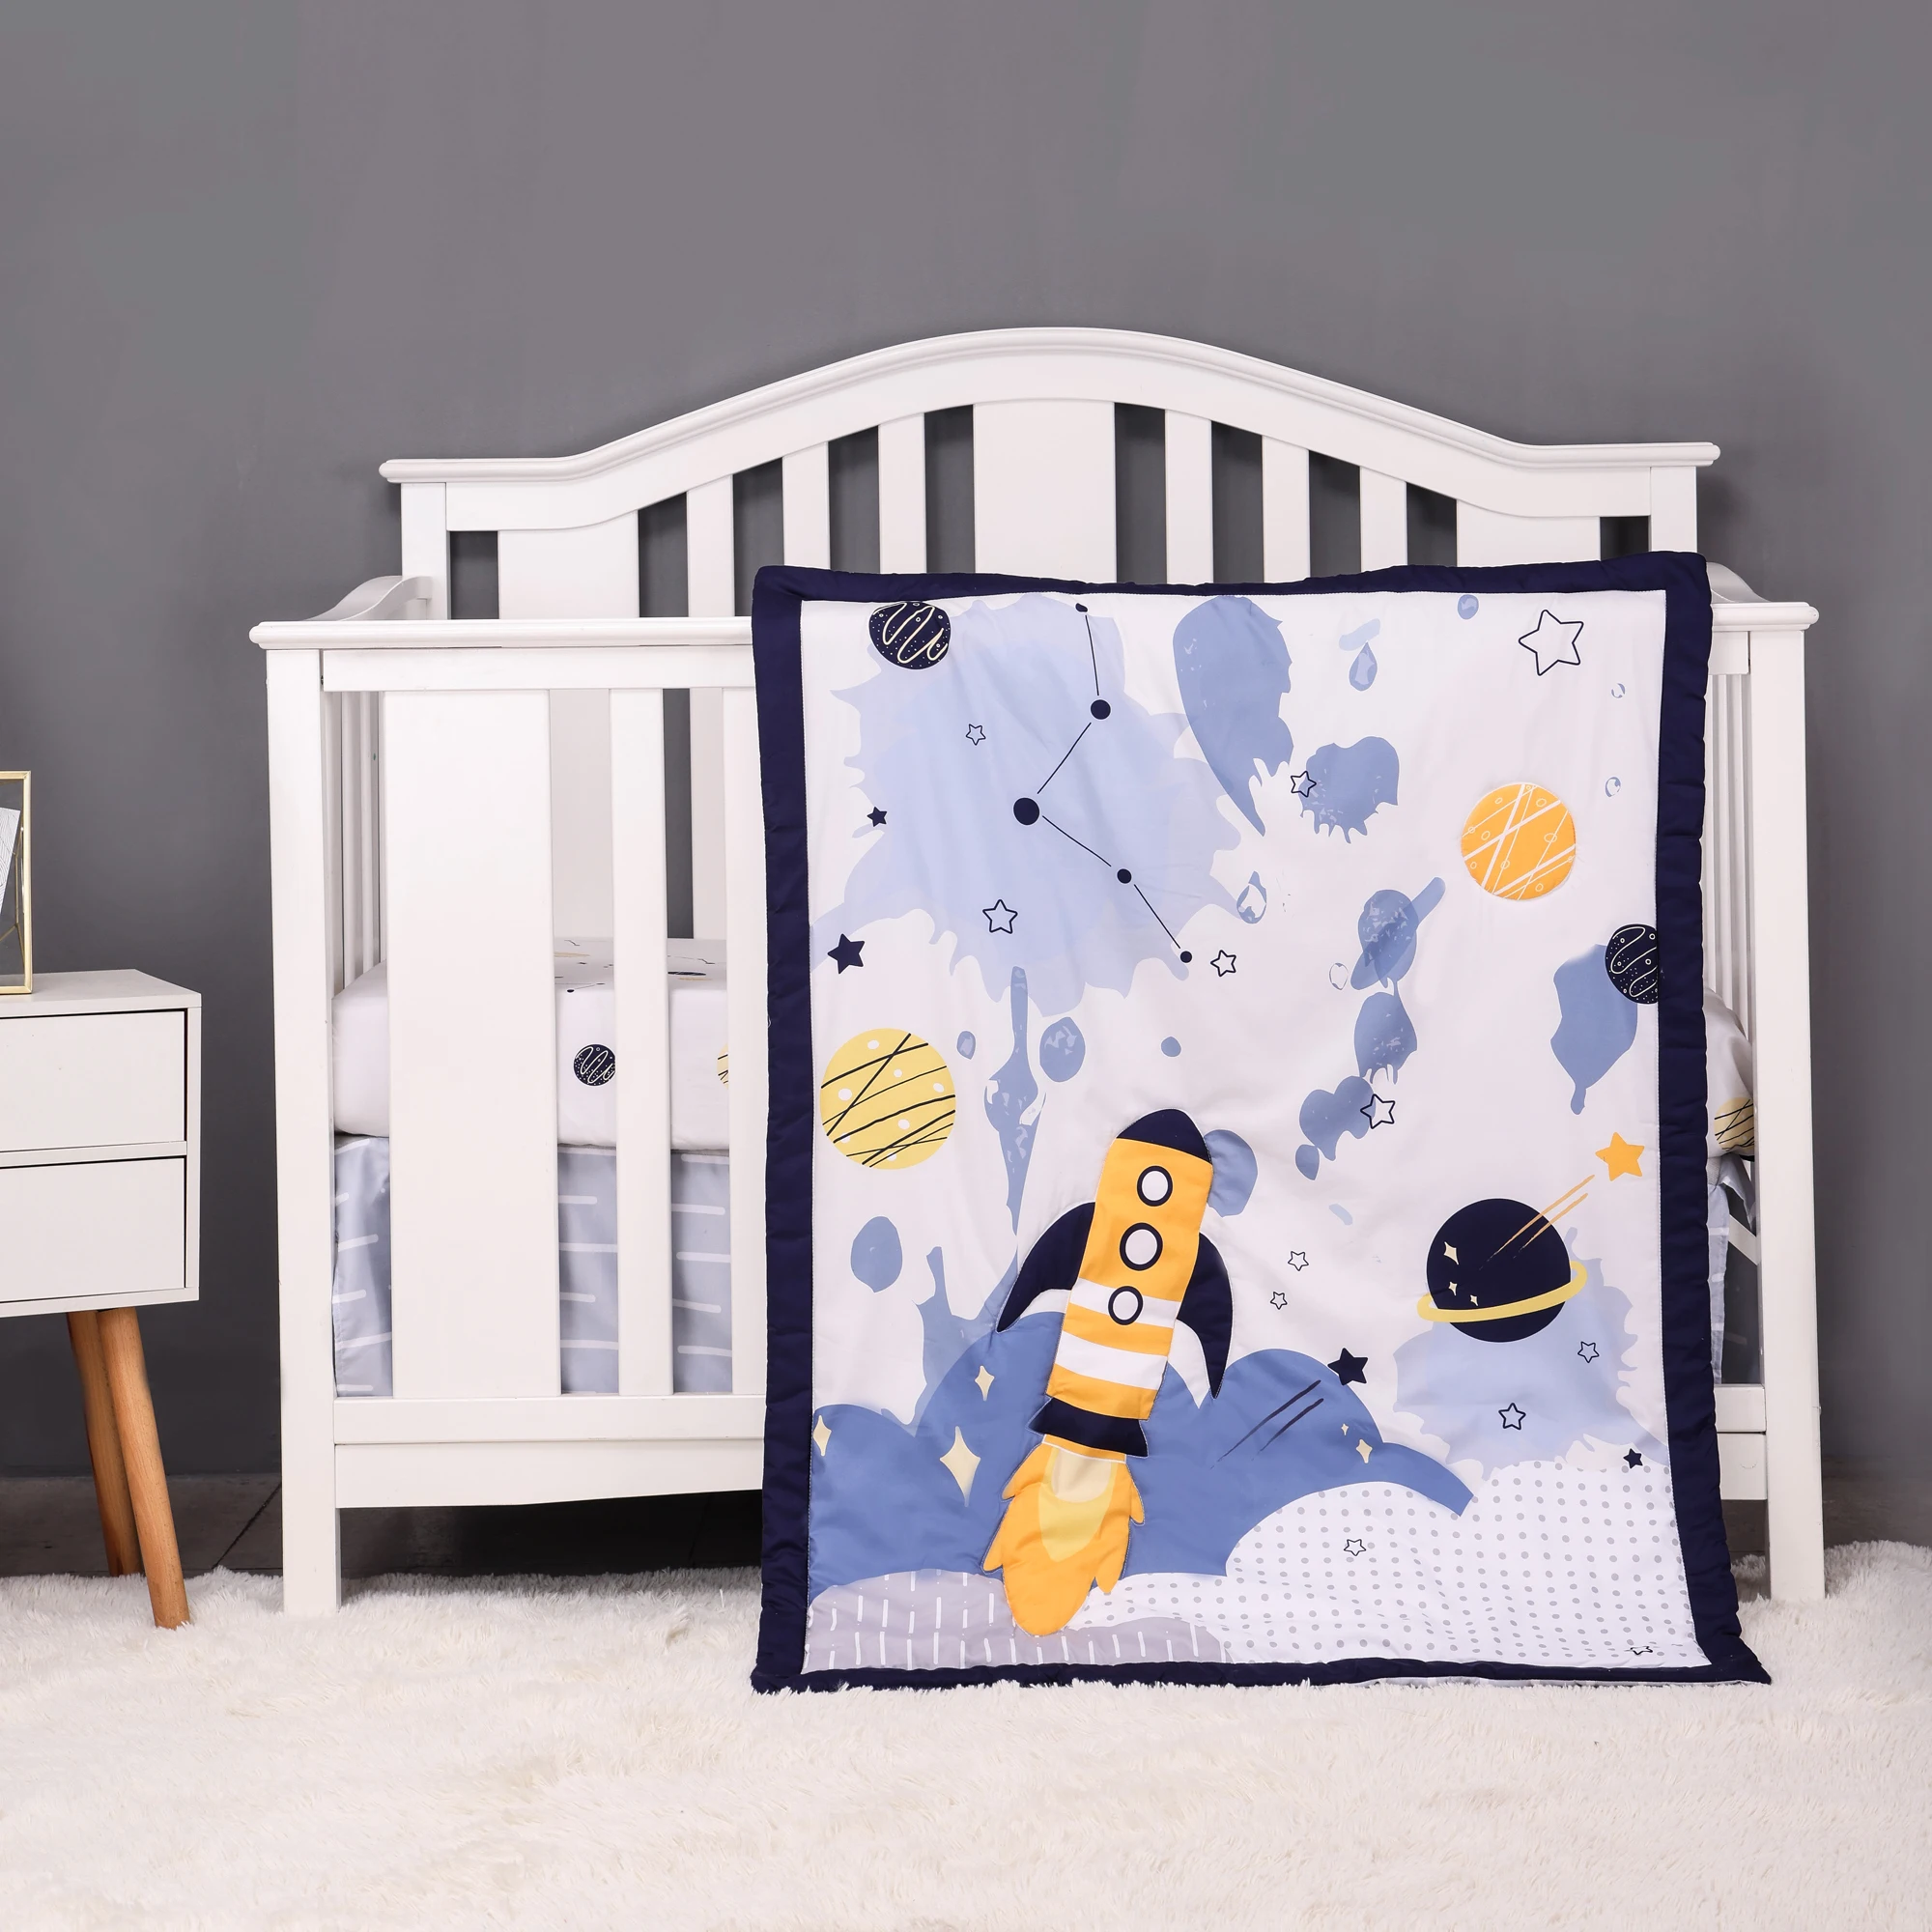 blue outspace 4 pcs Baby Crib Bedding Set for Girls and boys including quilt, crib sheet, crib skirt,pillow case